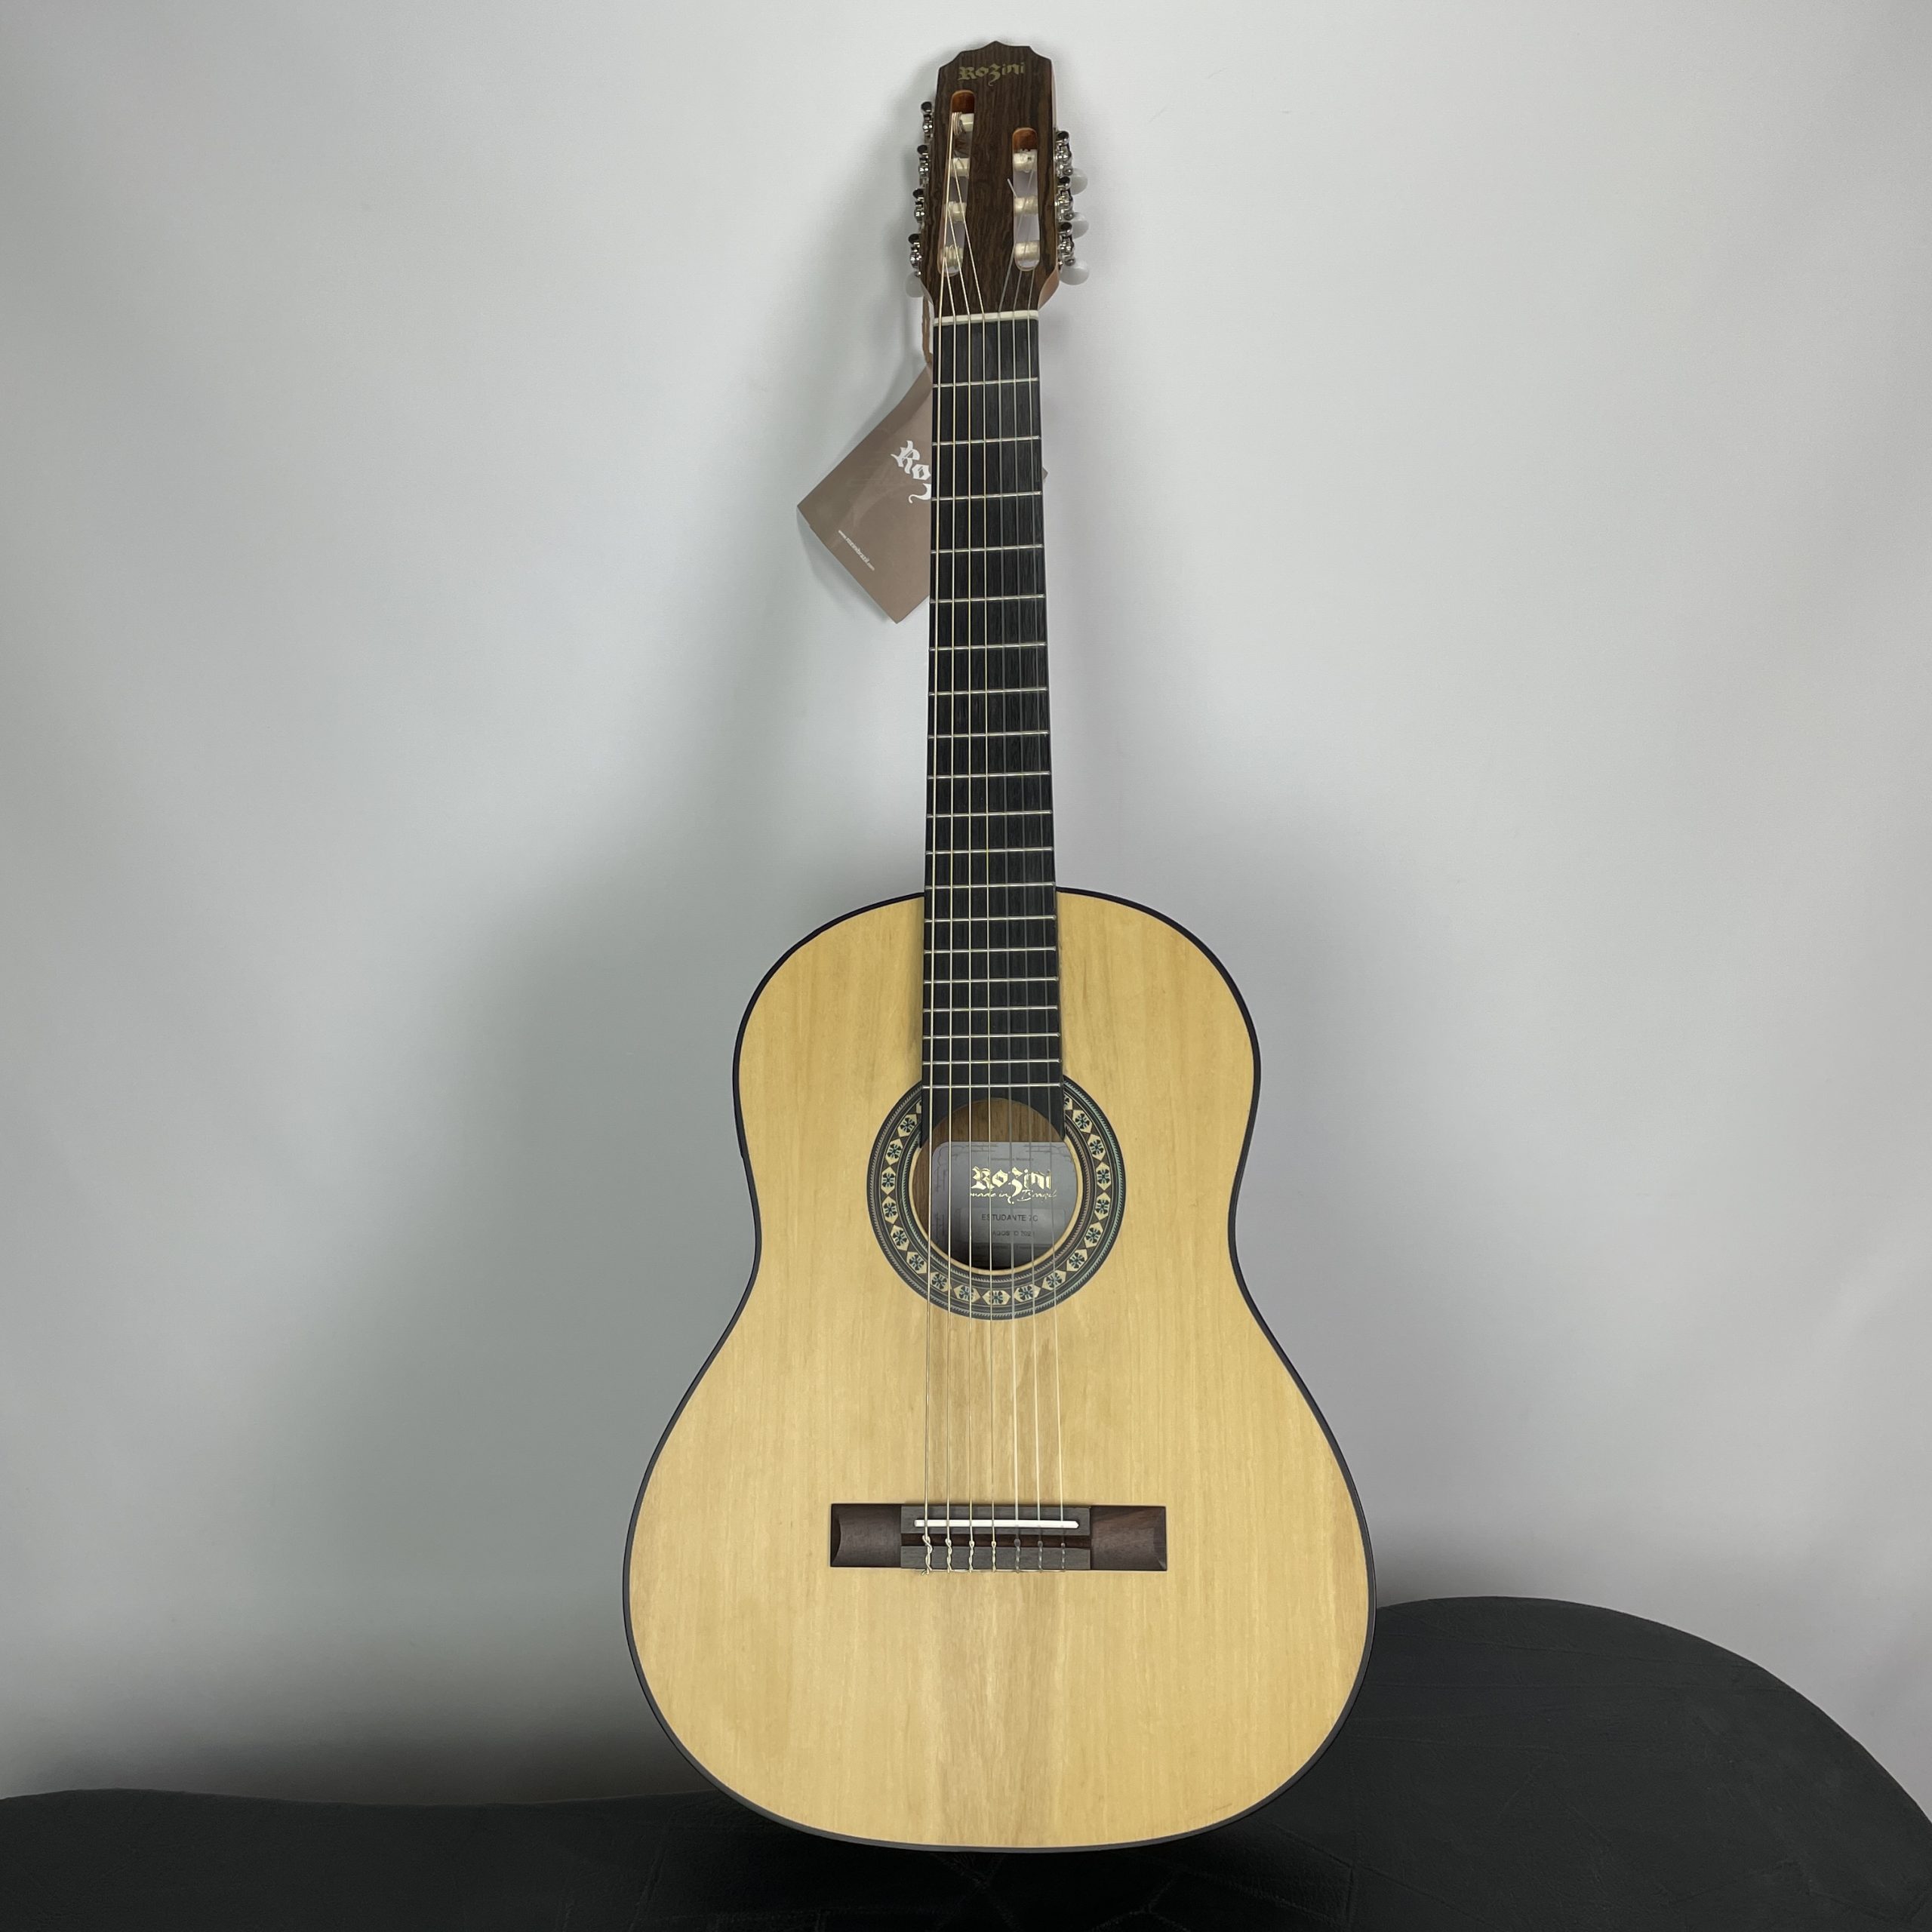 Rozini Student 7-string Guitar with pickup and EQ